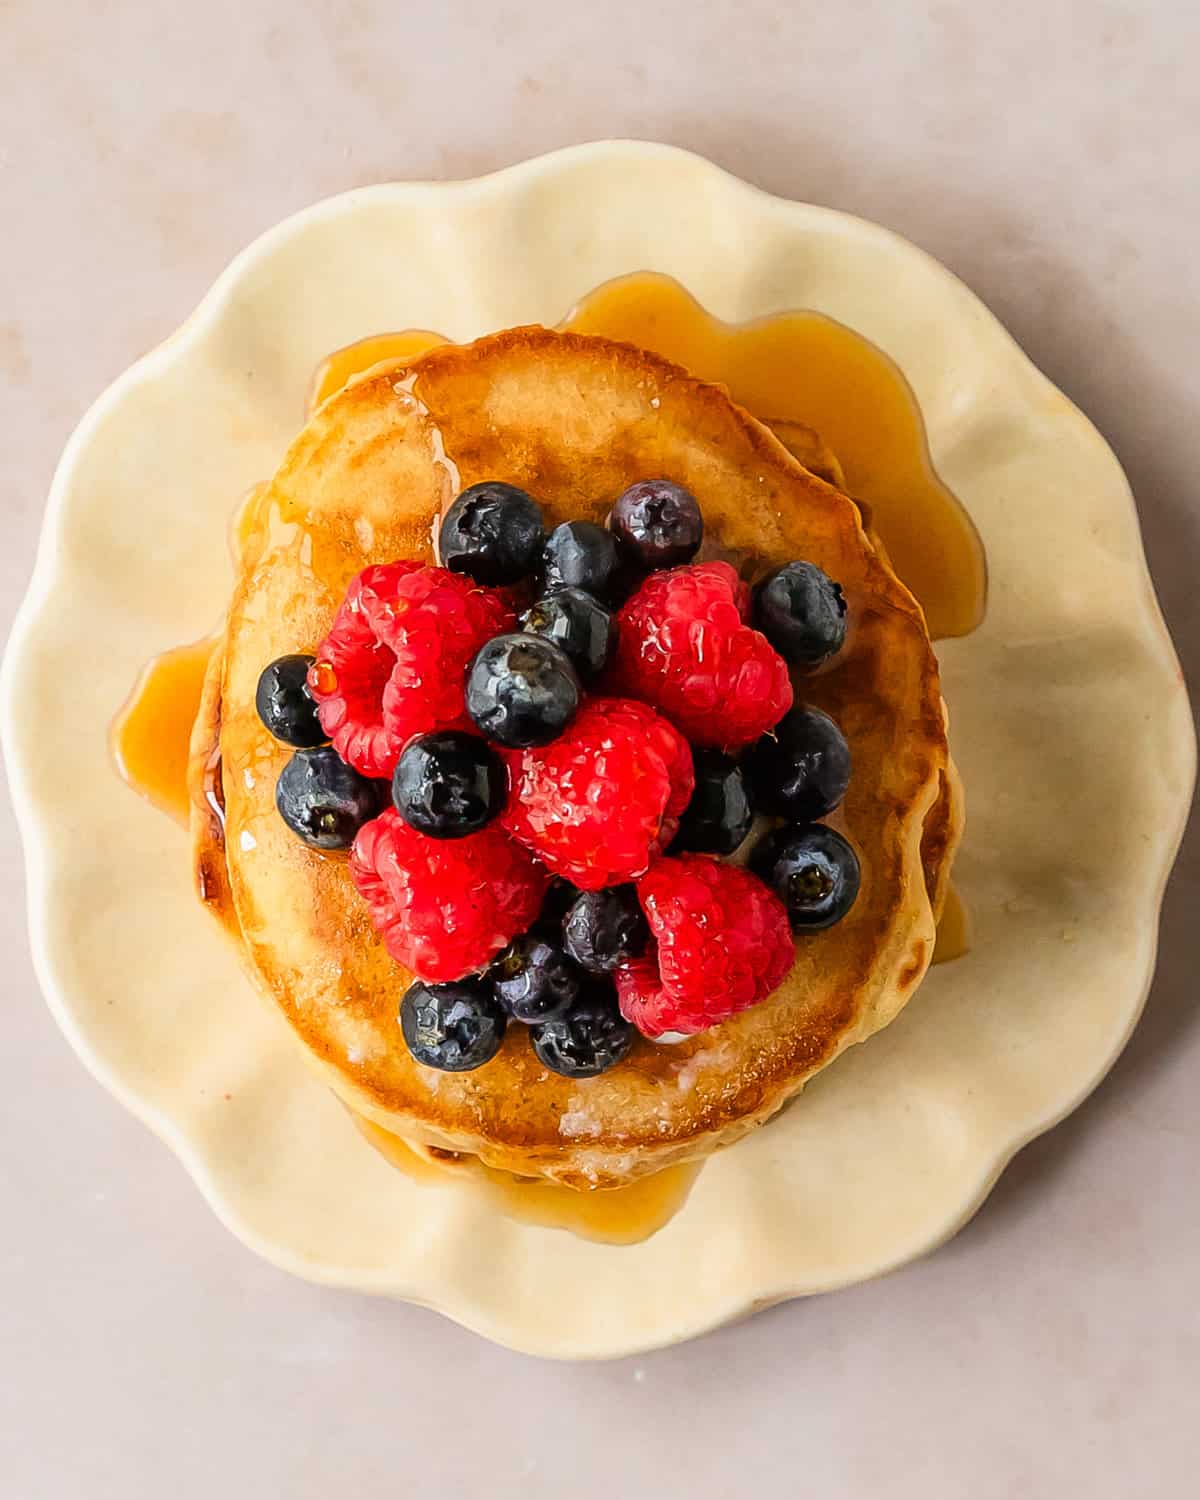 Learn how to make these quick and easy no milk pancakes using simple pantry ingredients and water as a substitute for milk. A stack of these from scratch pancakes makes the perfect cozy breakfast everyone will love, even if you don’t have milk. 